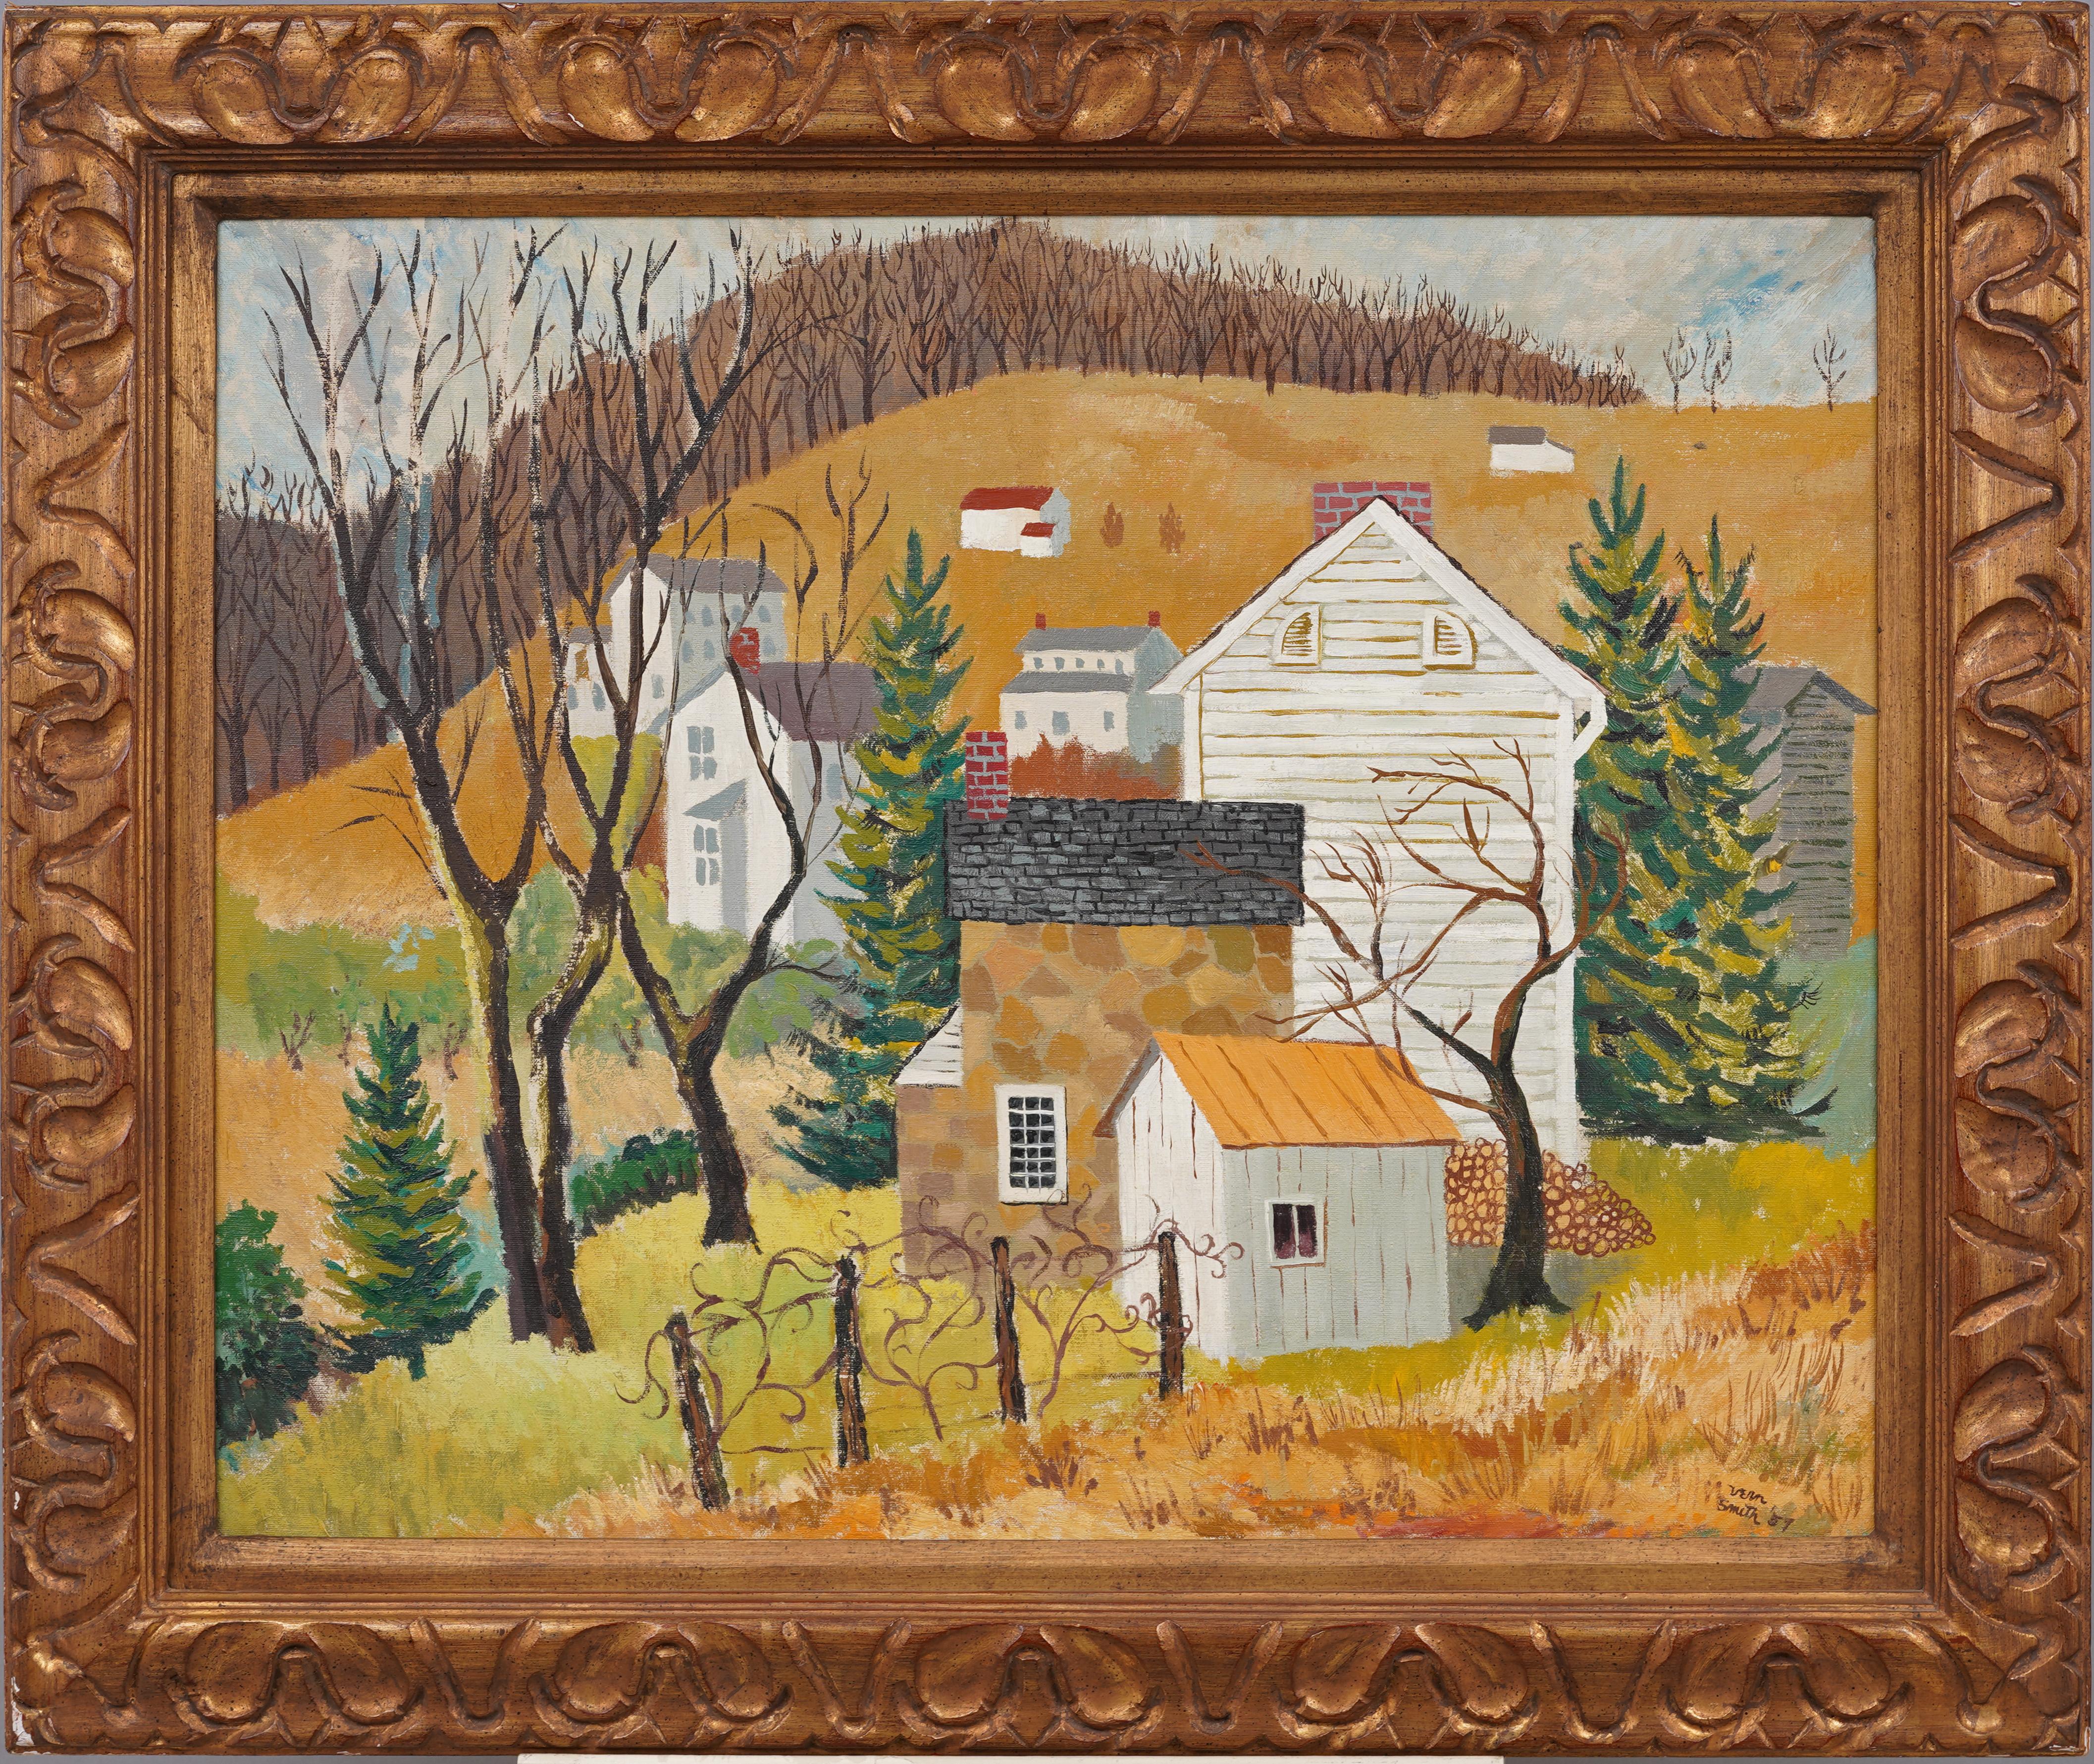 Charming and well painted rural New England modernist landcape by Vern Henry Smith (1927 - 2007.  Oil on canvas.  Framed.  Signed. 